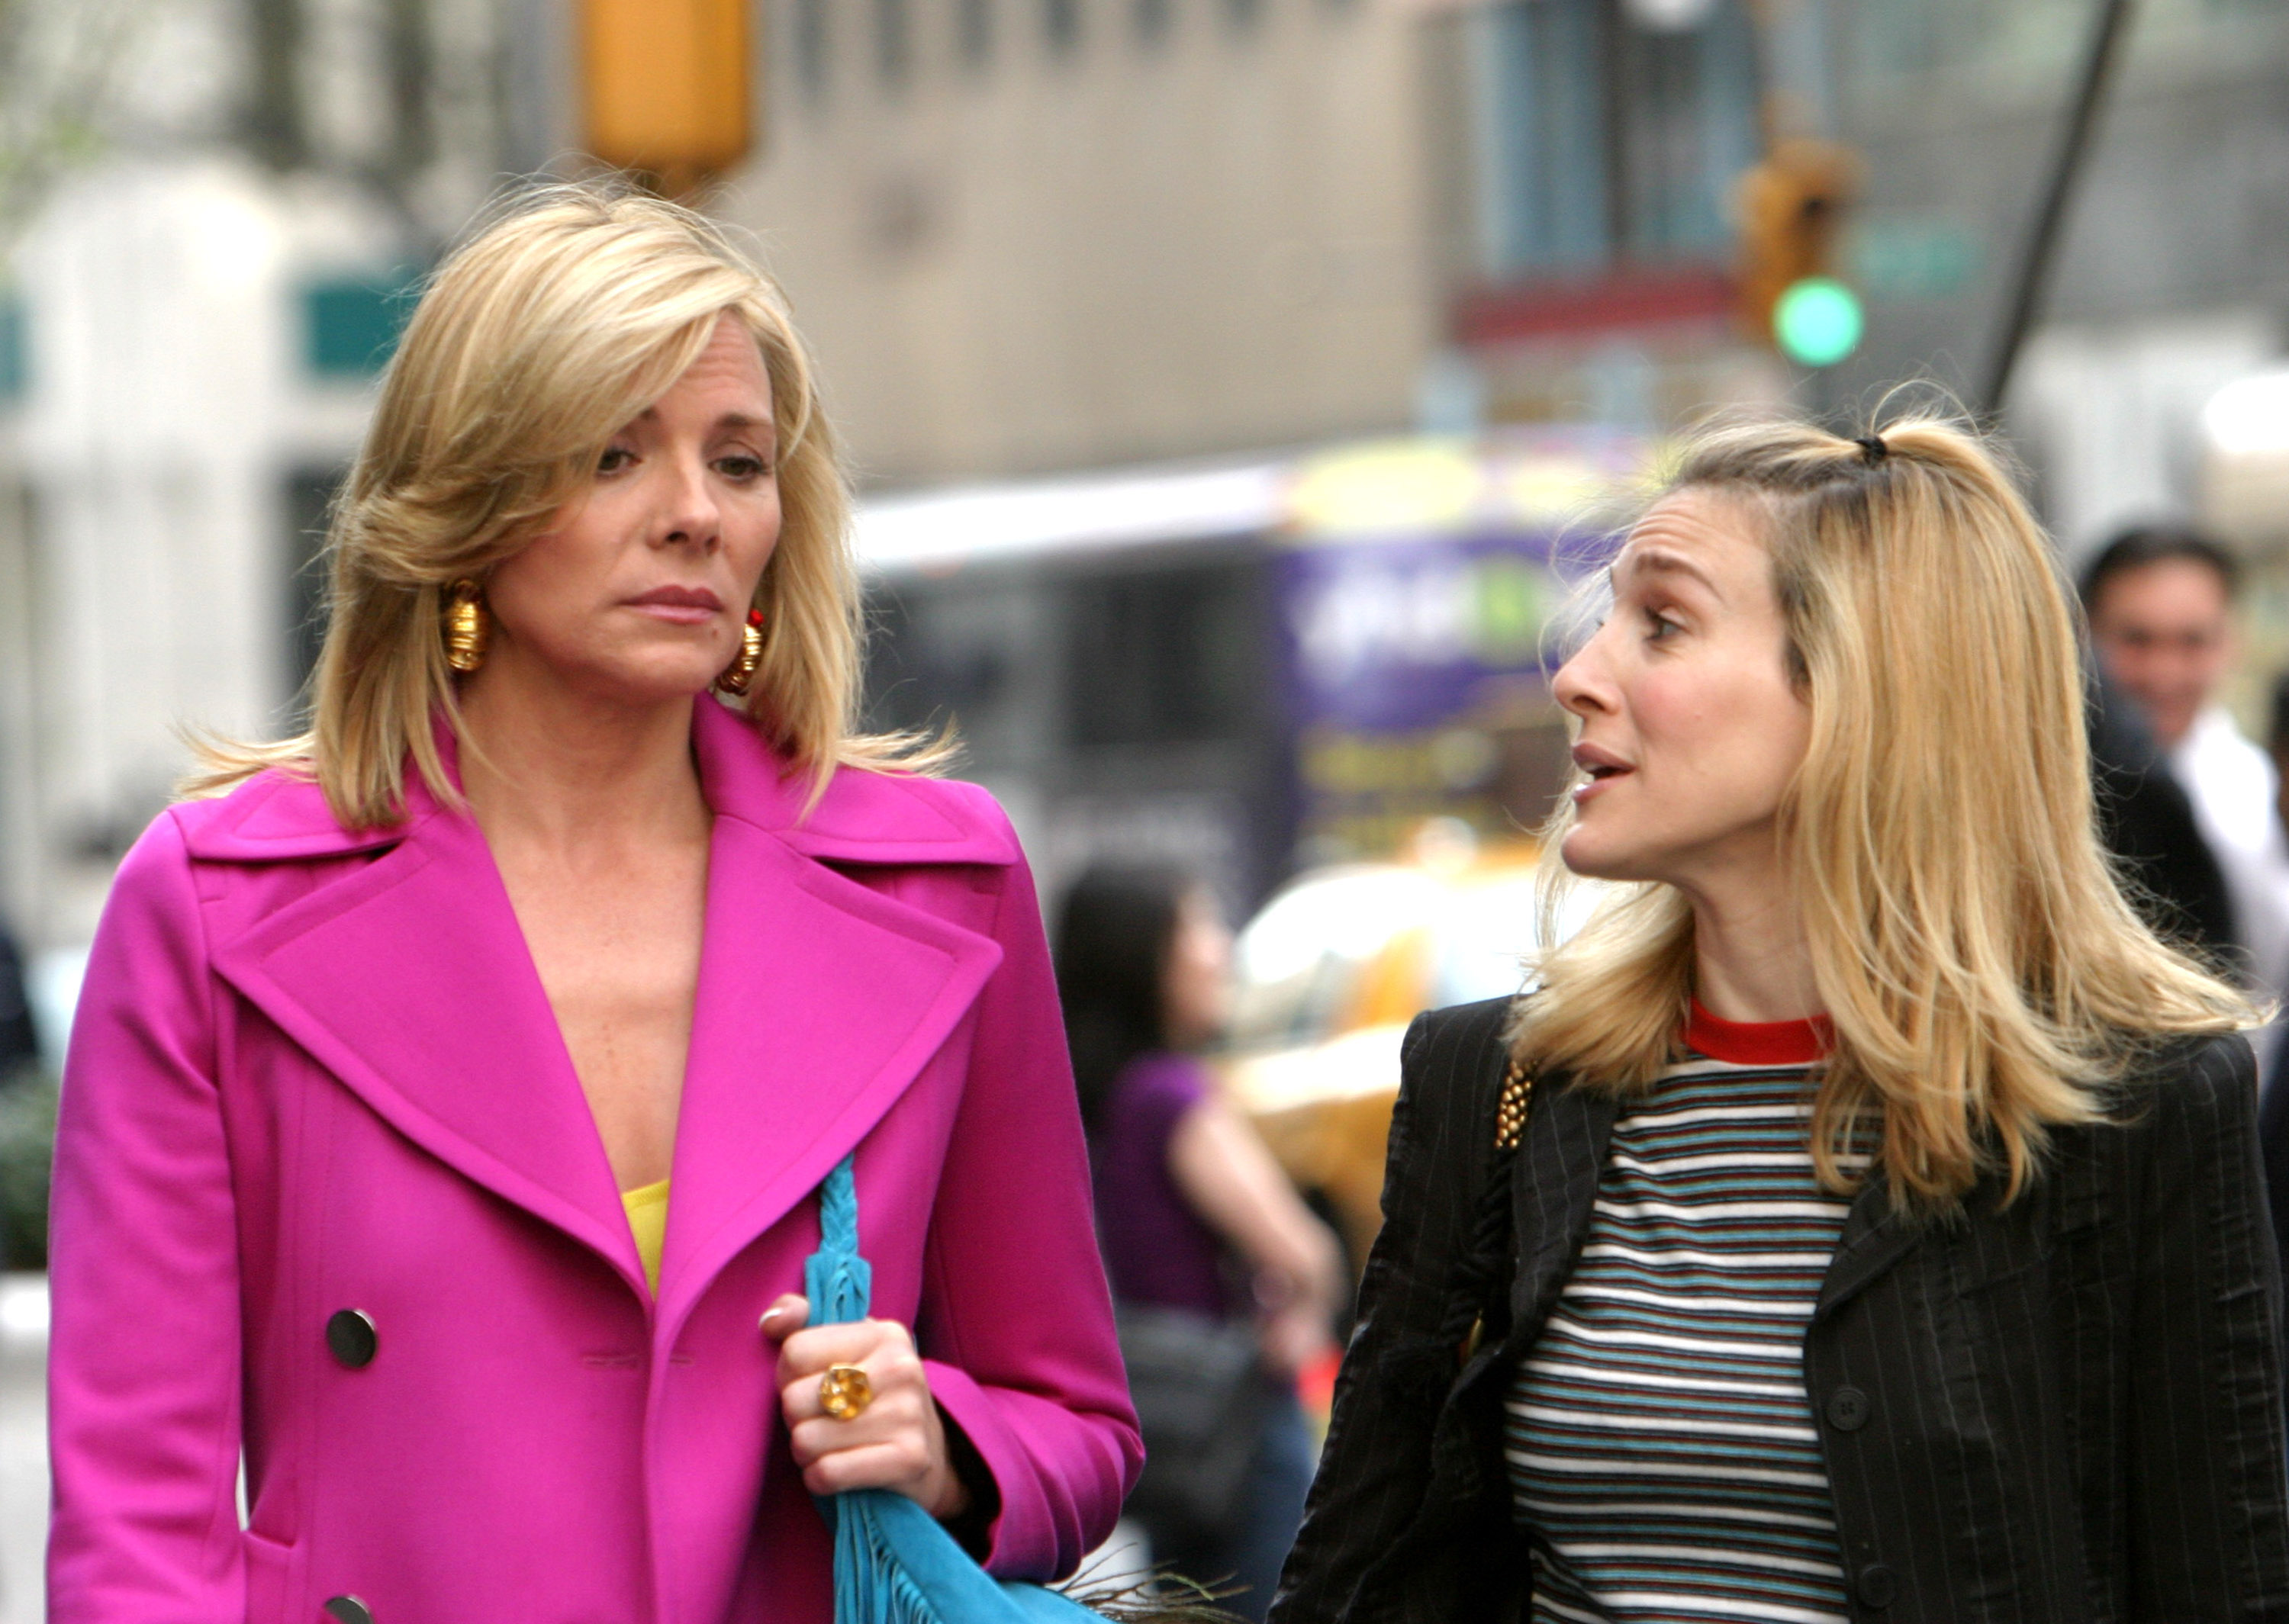 Kim Cattrall and Sarah Jessica Parker on location filming Sex and the City.